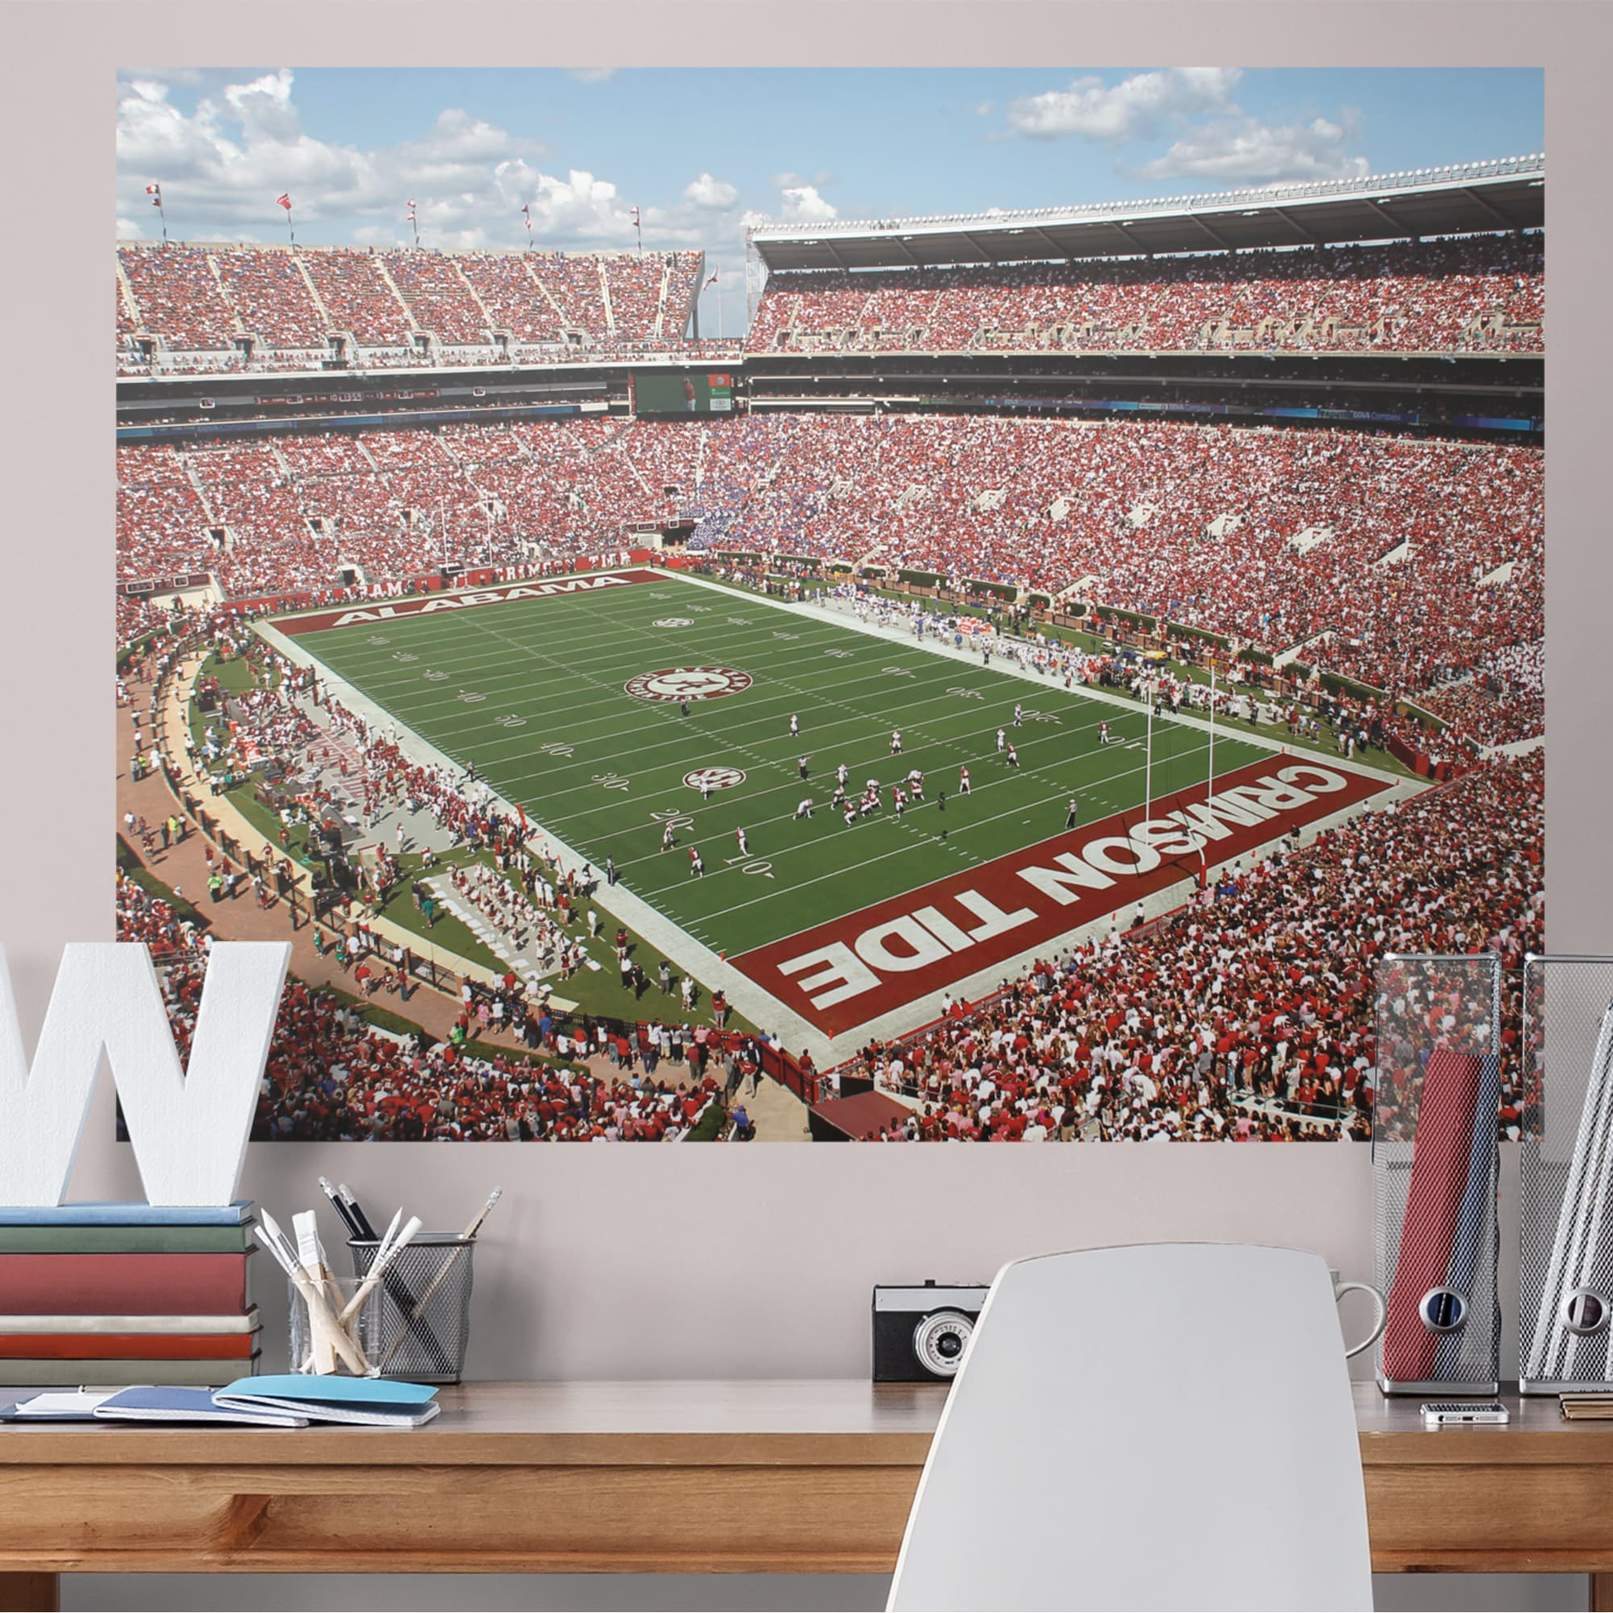 https://fathead.com/collections/alabama-crimson-tide/products/61-62539